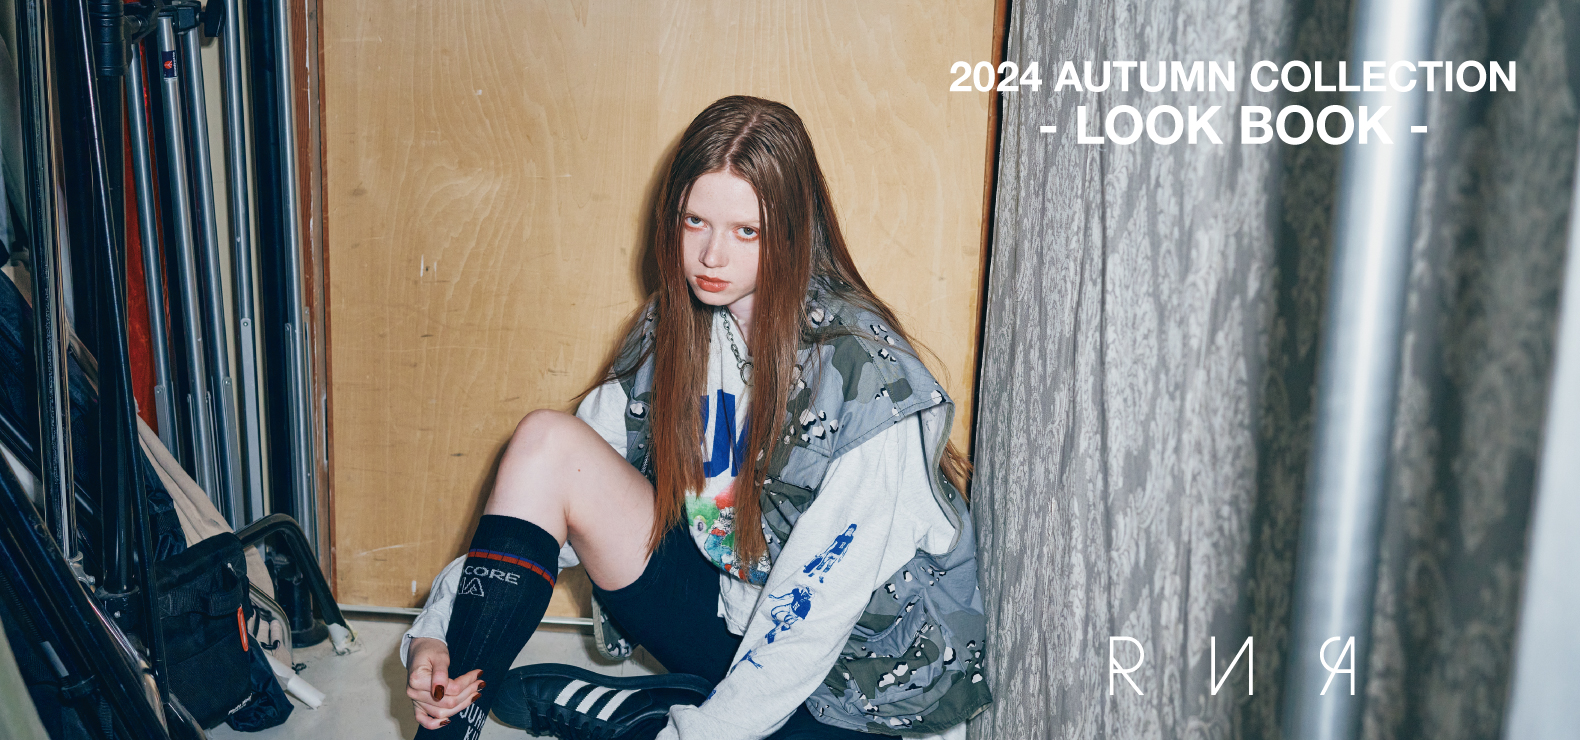 2024 AUTUMN COLLECTION LOOK BOOK